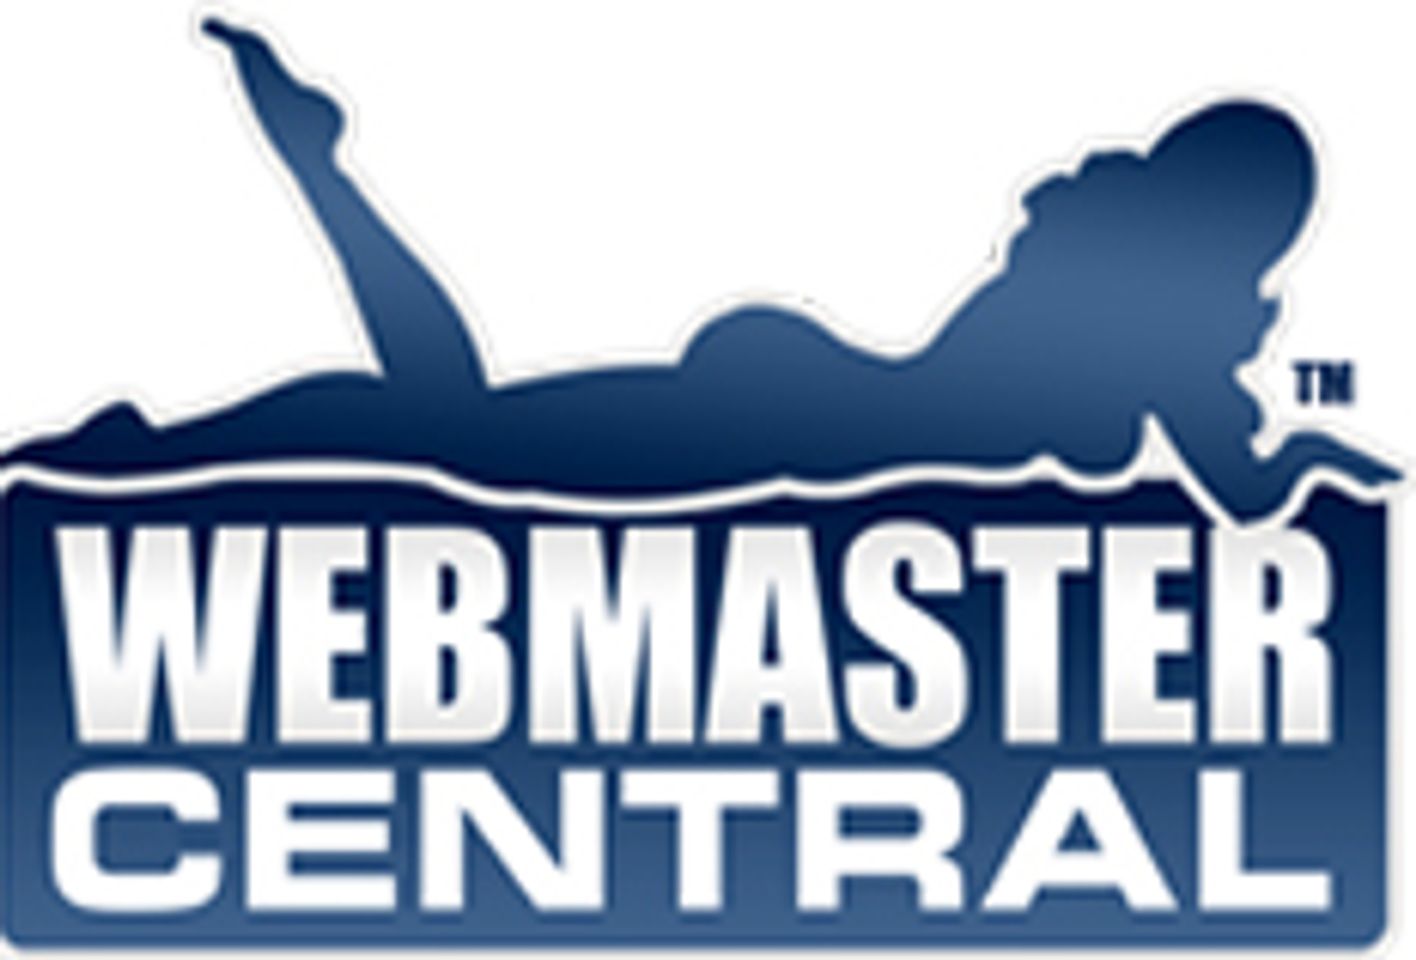 Webmaster Central Lists Top Niche Content for 2014